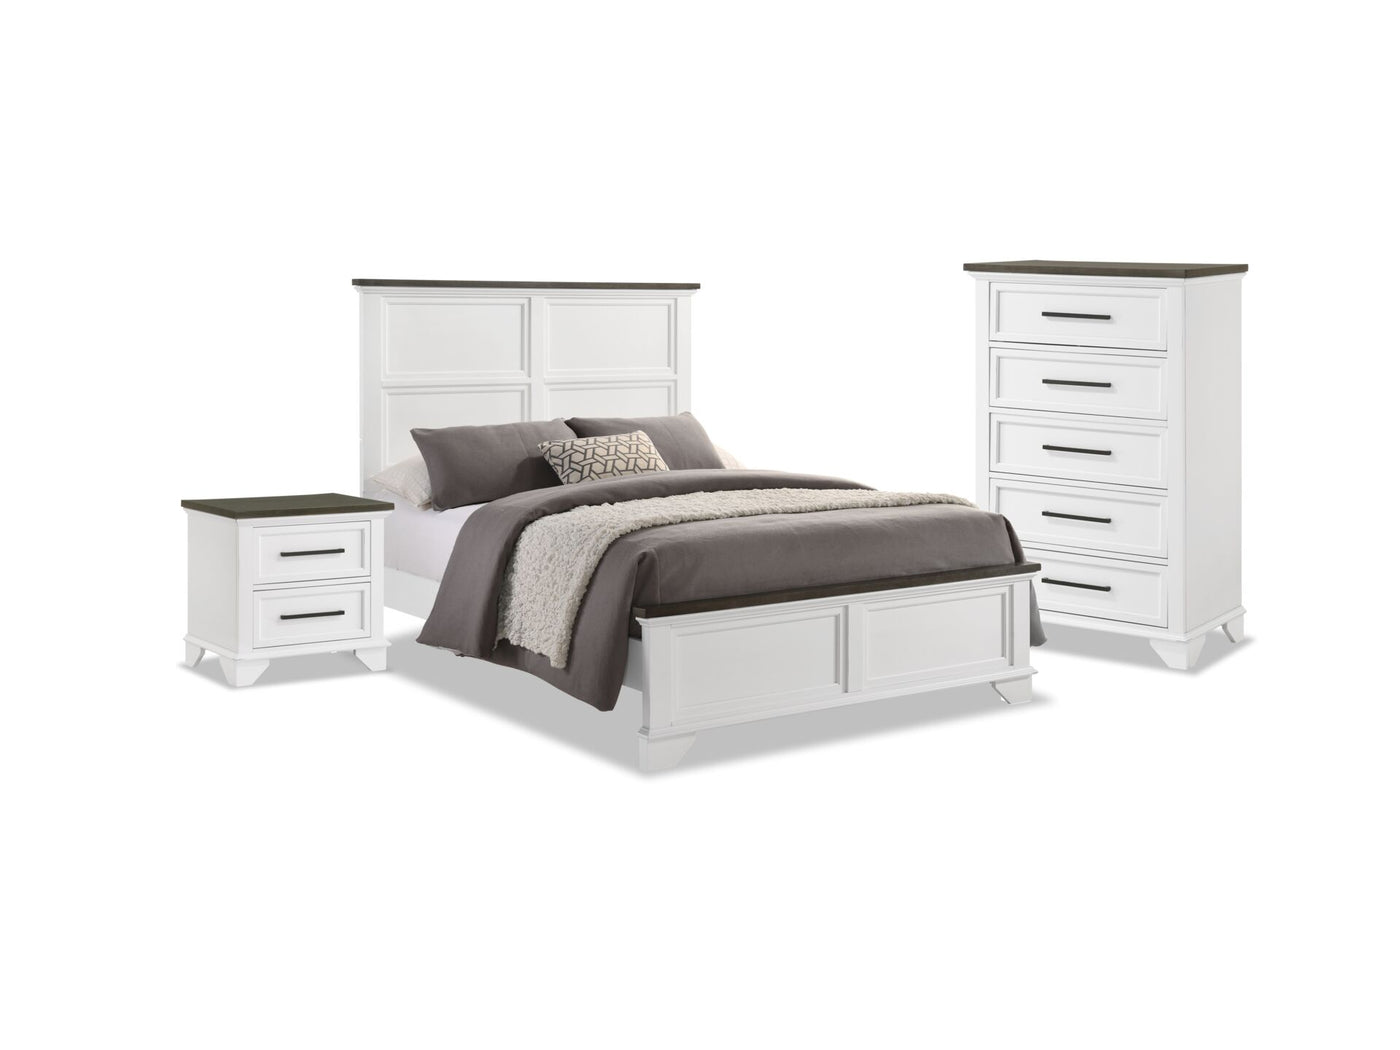 Abigail 5-Piece King Bedroom Package - White and Grey